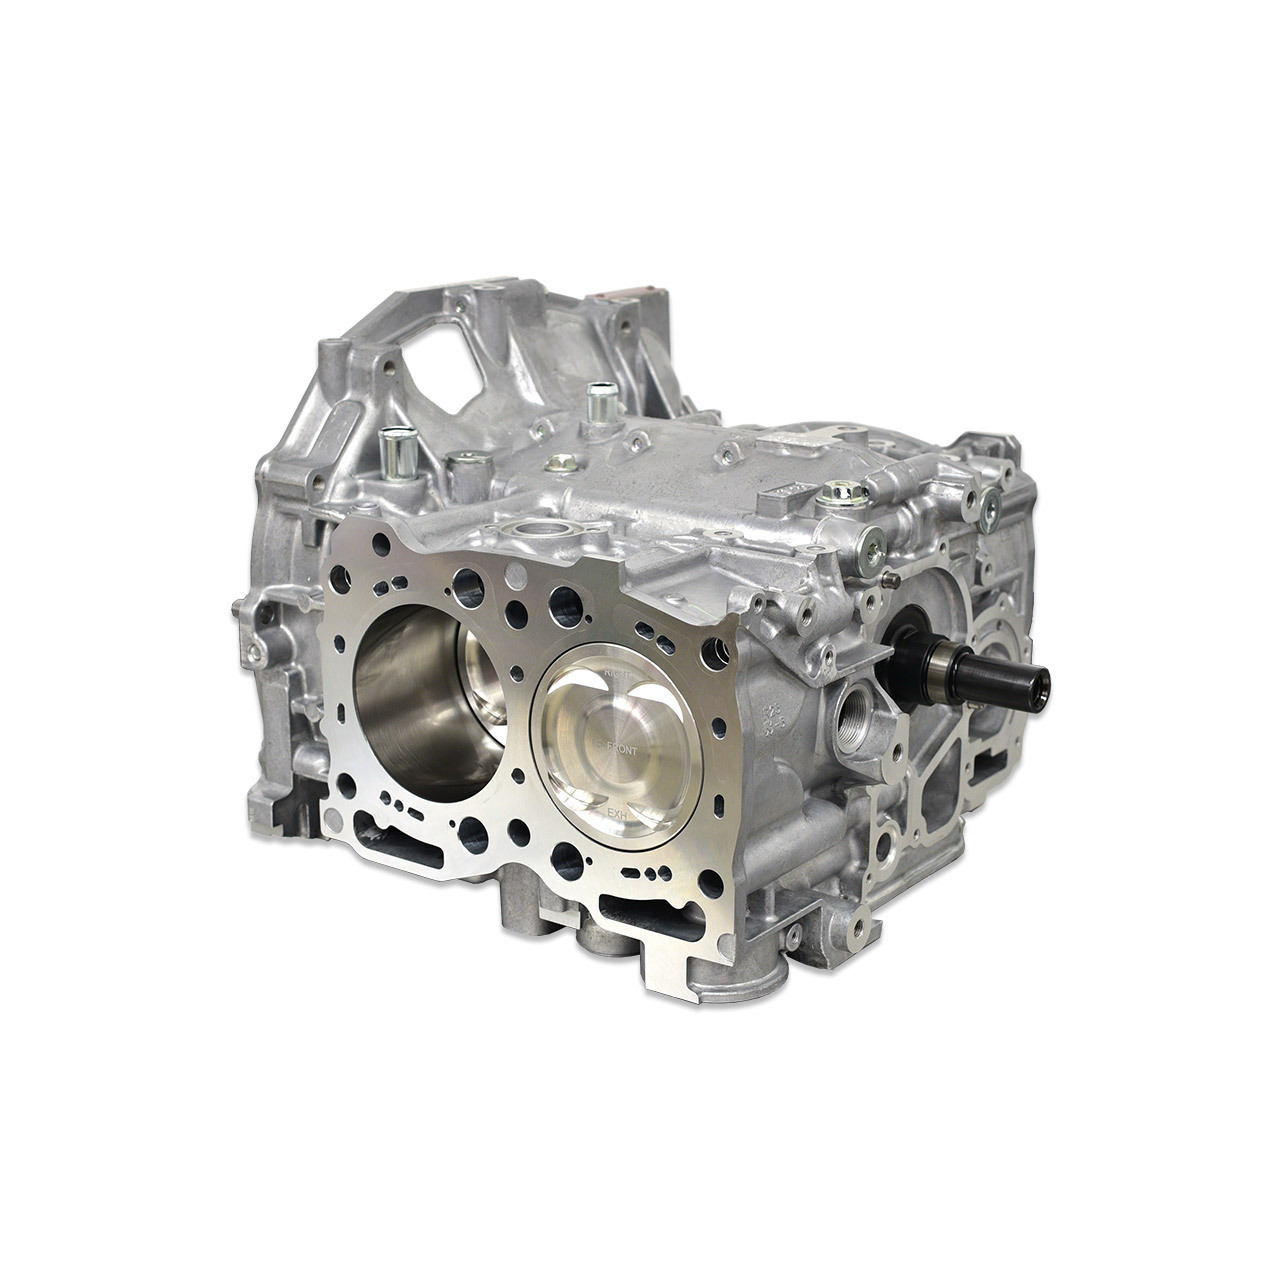 IAG Stage 2.5 Closed Deck Short Block